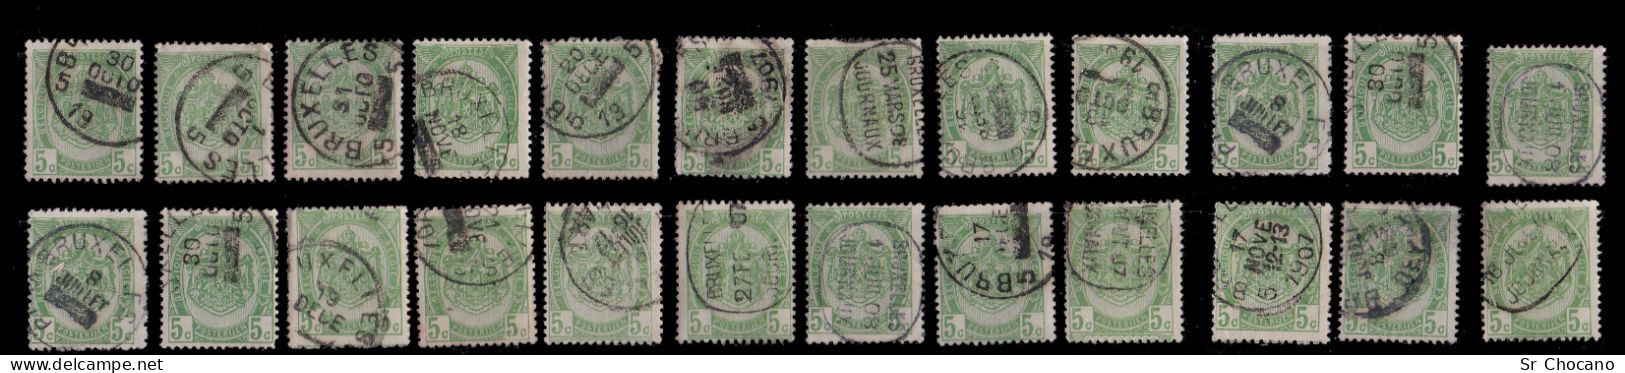 BELGIUM.1893-1907.5c.108 STAMPS DATER.YVERT 56-83.USED. - 1893-1907 Coat Of Arms